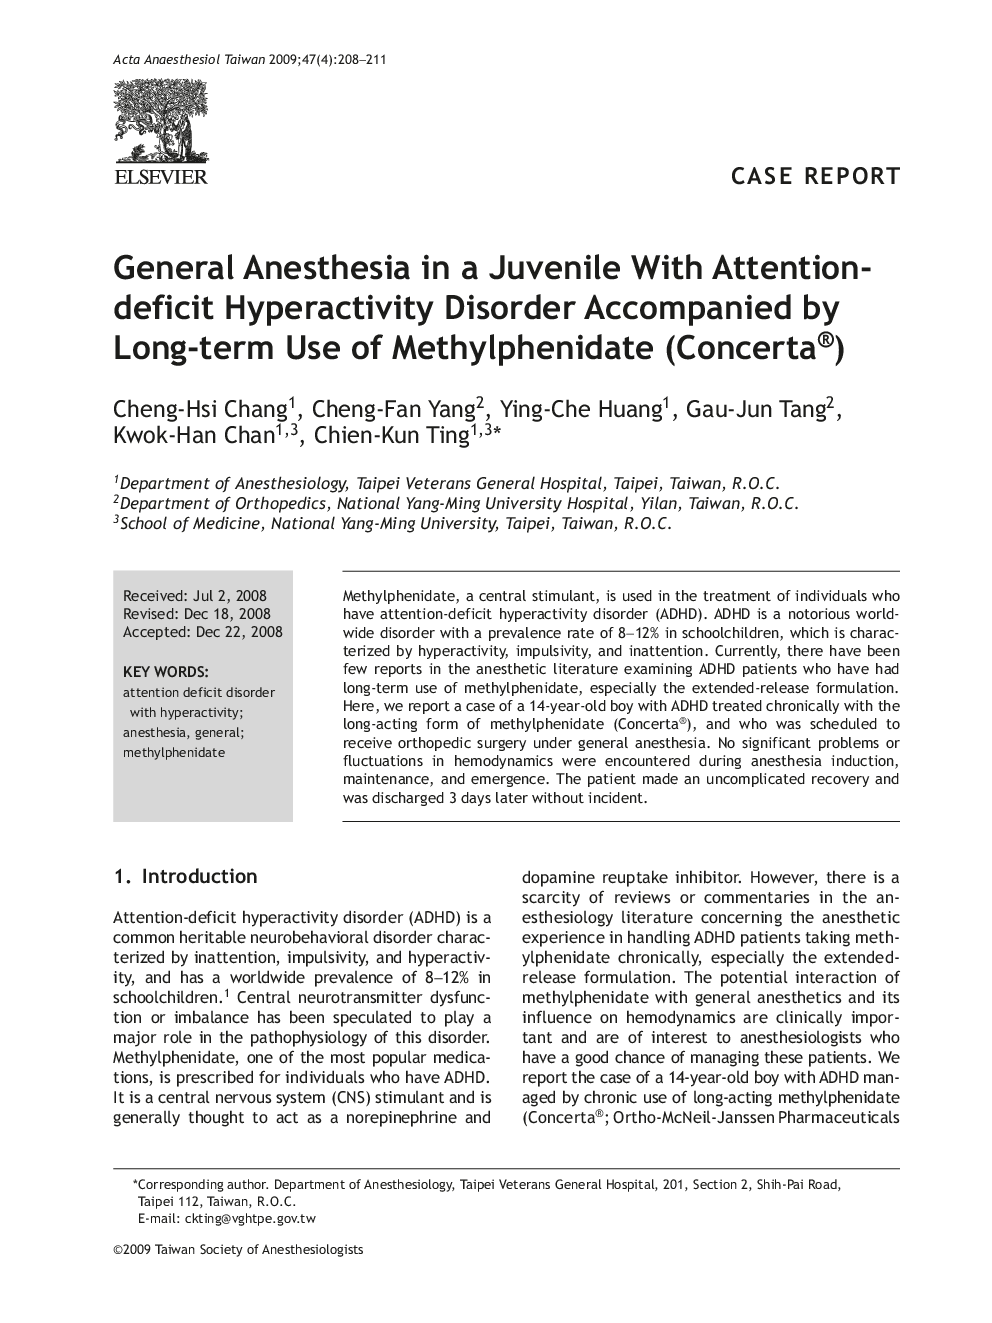 General Anesthesia in a Juvenile With Attention-deficit Hyperactivity Disorder Accompanied by Long-term Use of Methylphenidate (Concerta®)